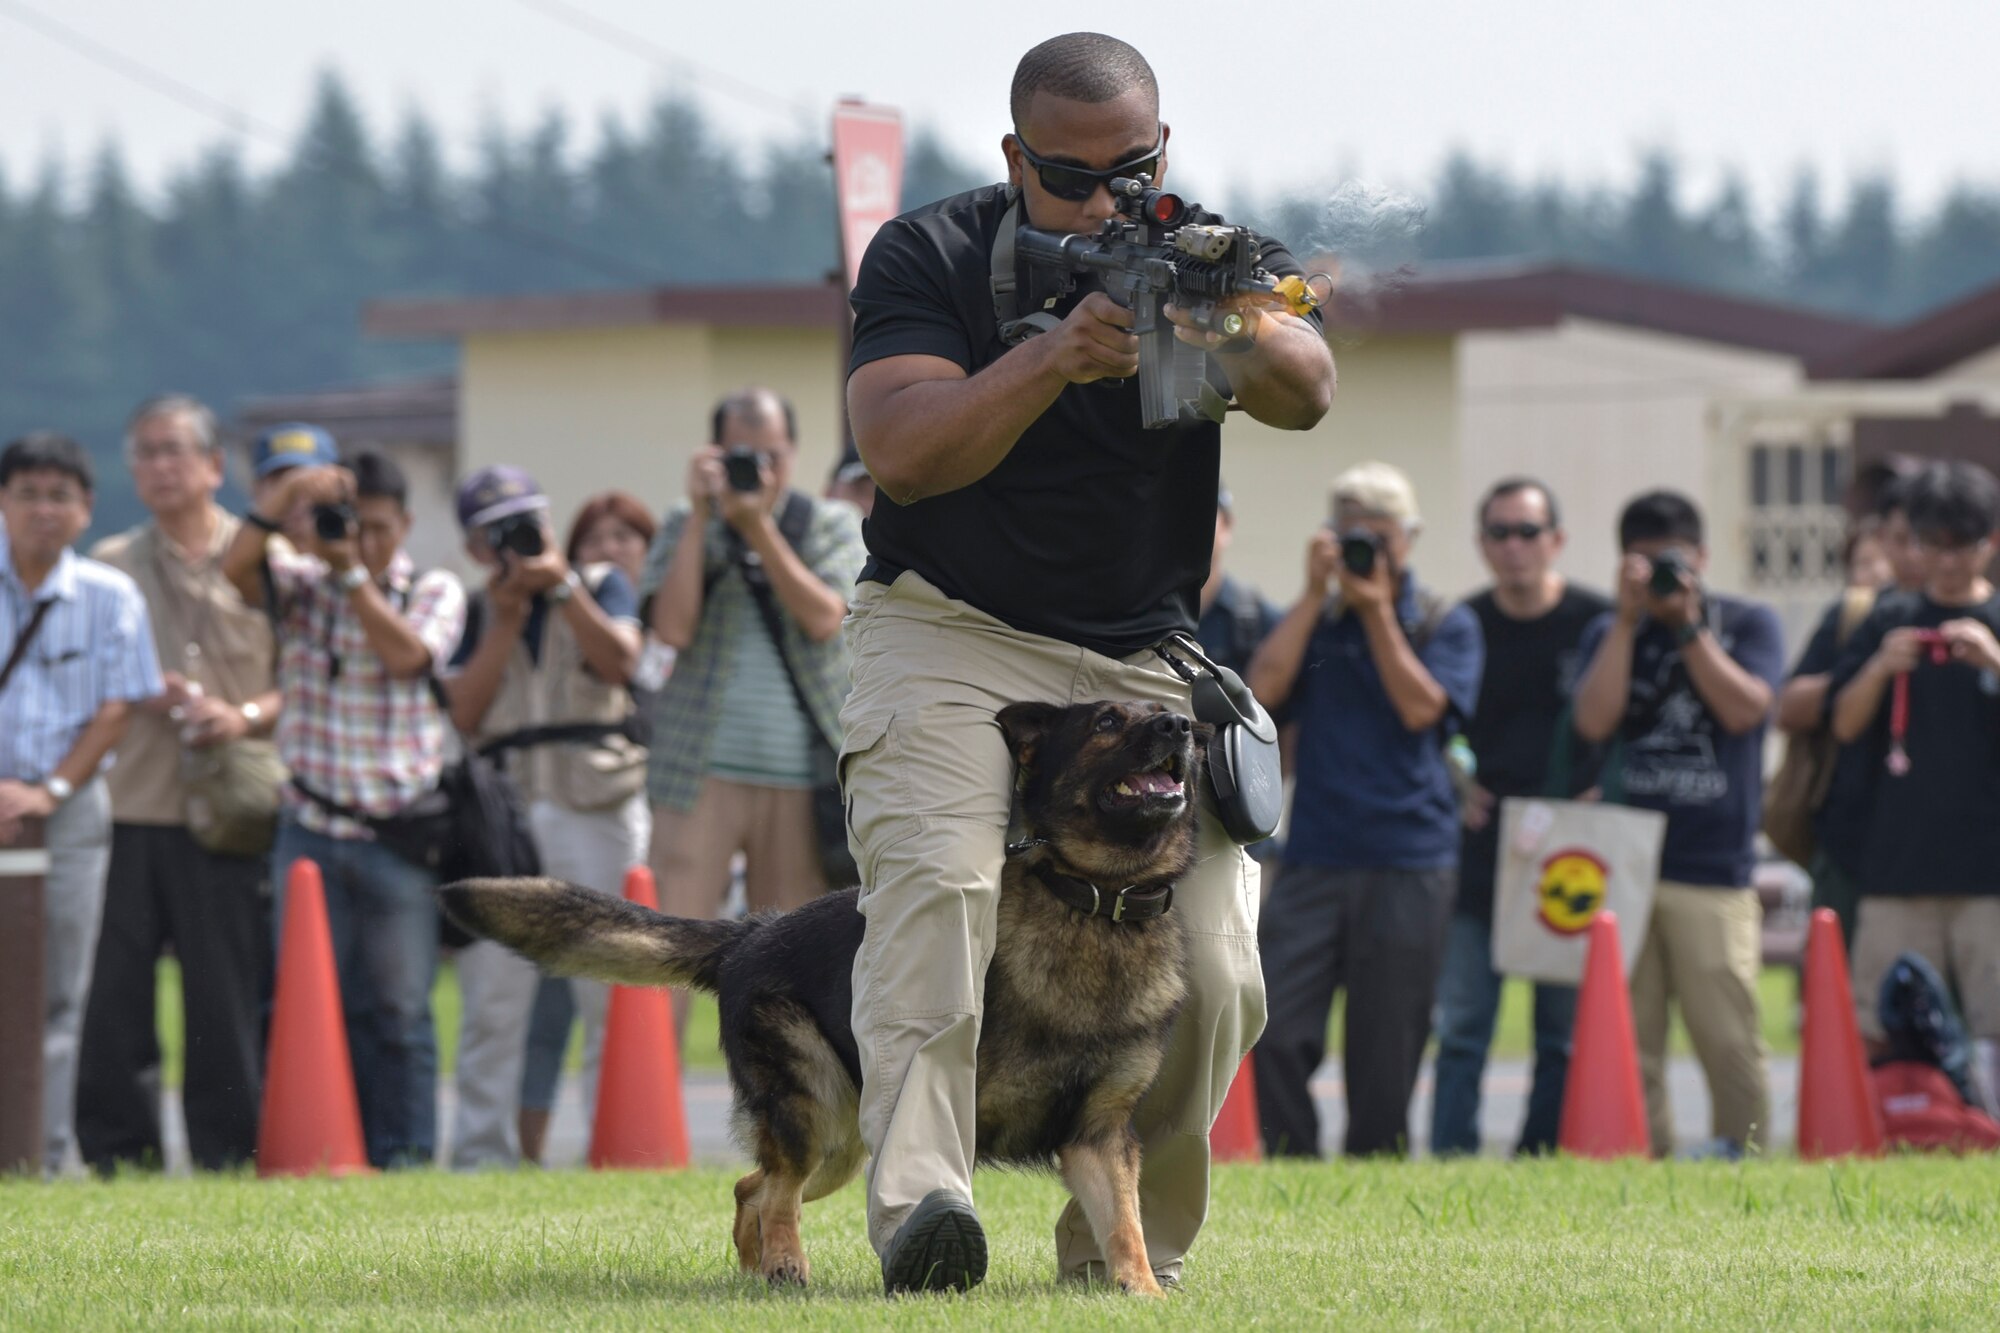 Staff Sgt. Dontae Stamps, 374th Security Forces Squadron military working dog handler, fires simulated rounds during the 2016 Friendship Festival K-9 demonstration at Yokota Air Base, Japan, Sept. 17, 2016. The festival hosted food vendors, static aircraft displays, live entertainment and military and government demonstrations. (U.S. Air Force photo by Machiko Imai/Released)